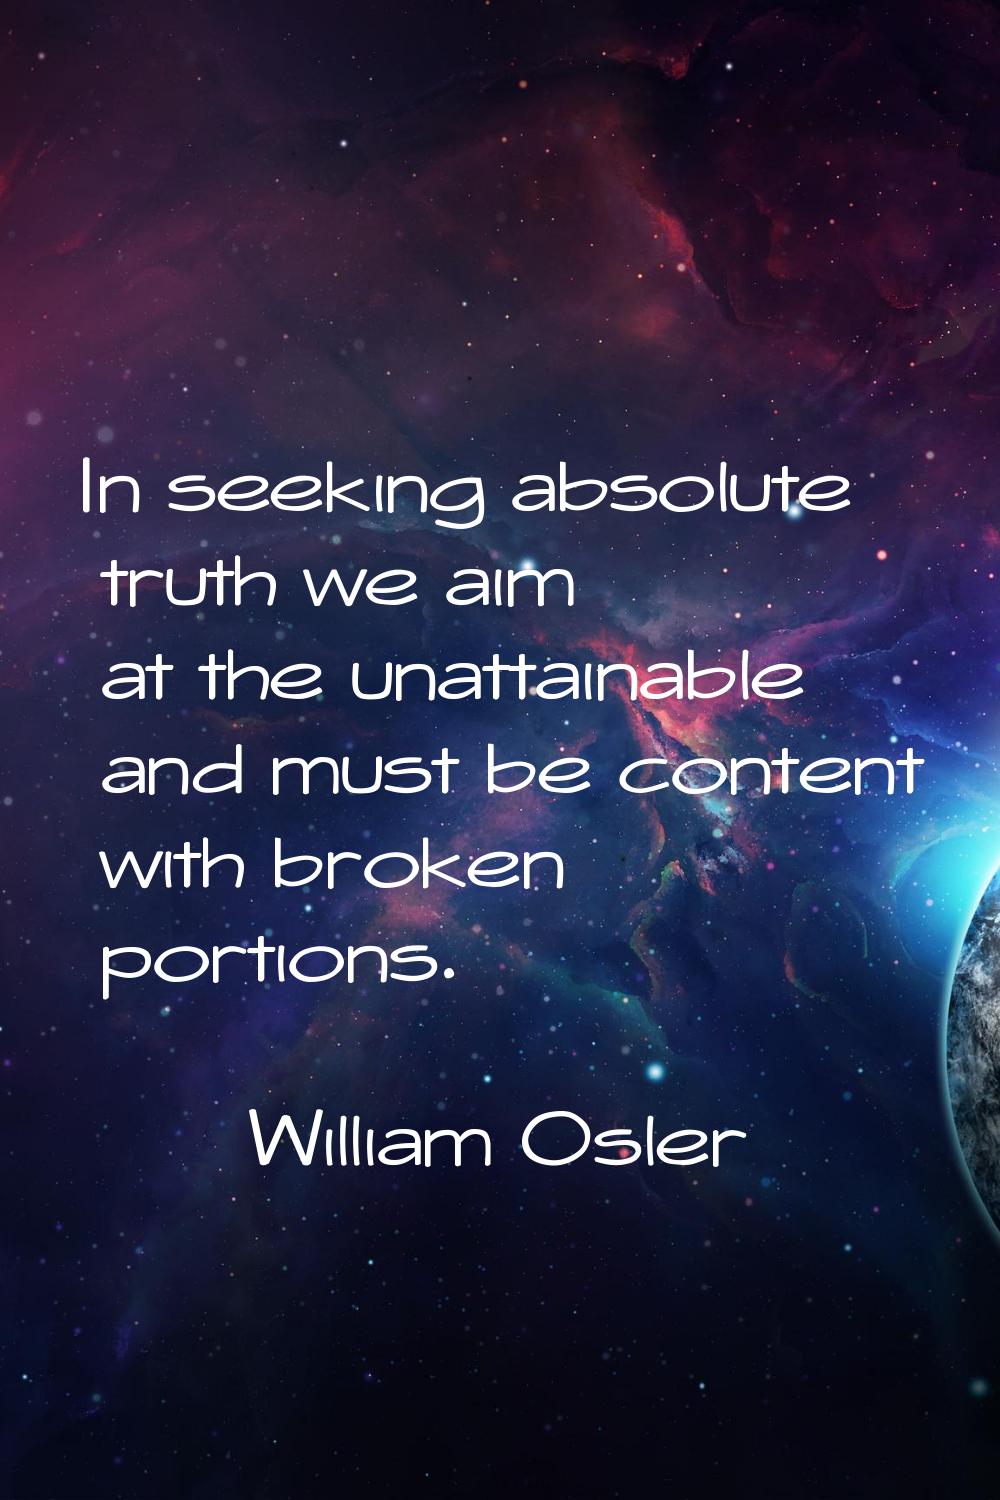 In seeking absolute truth we aim at the unattainable and must be content with broken portions.